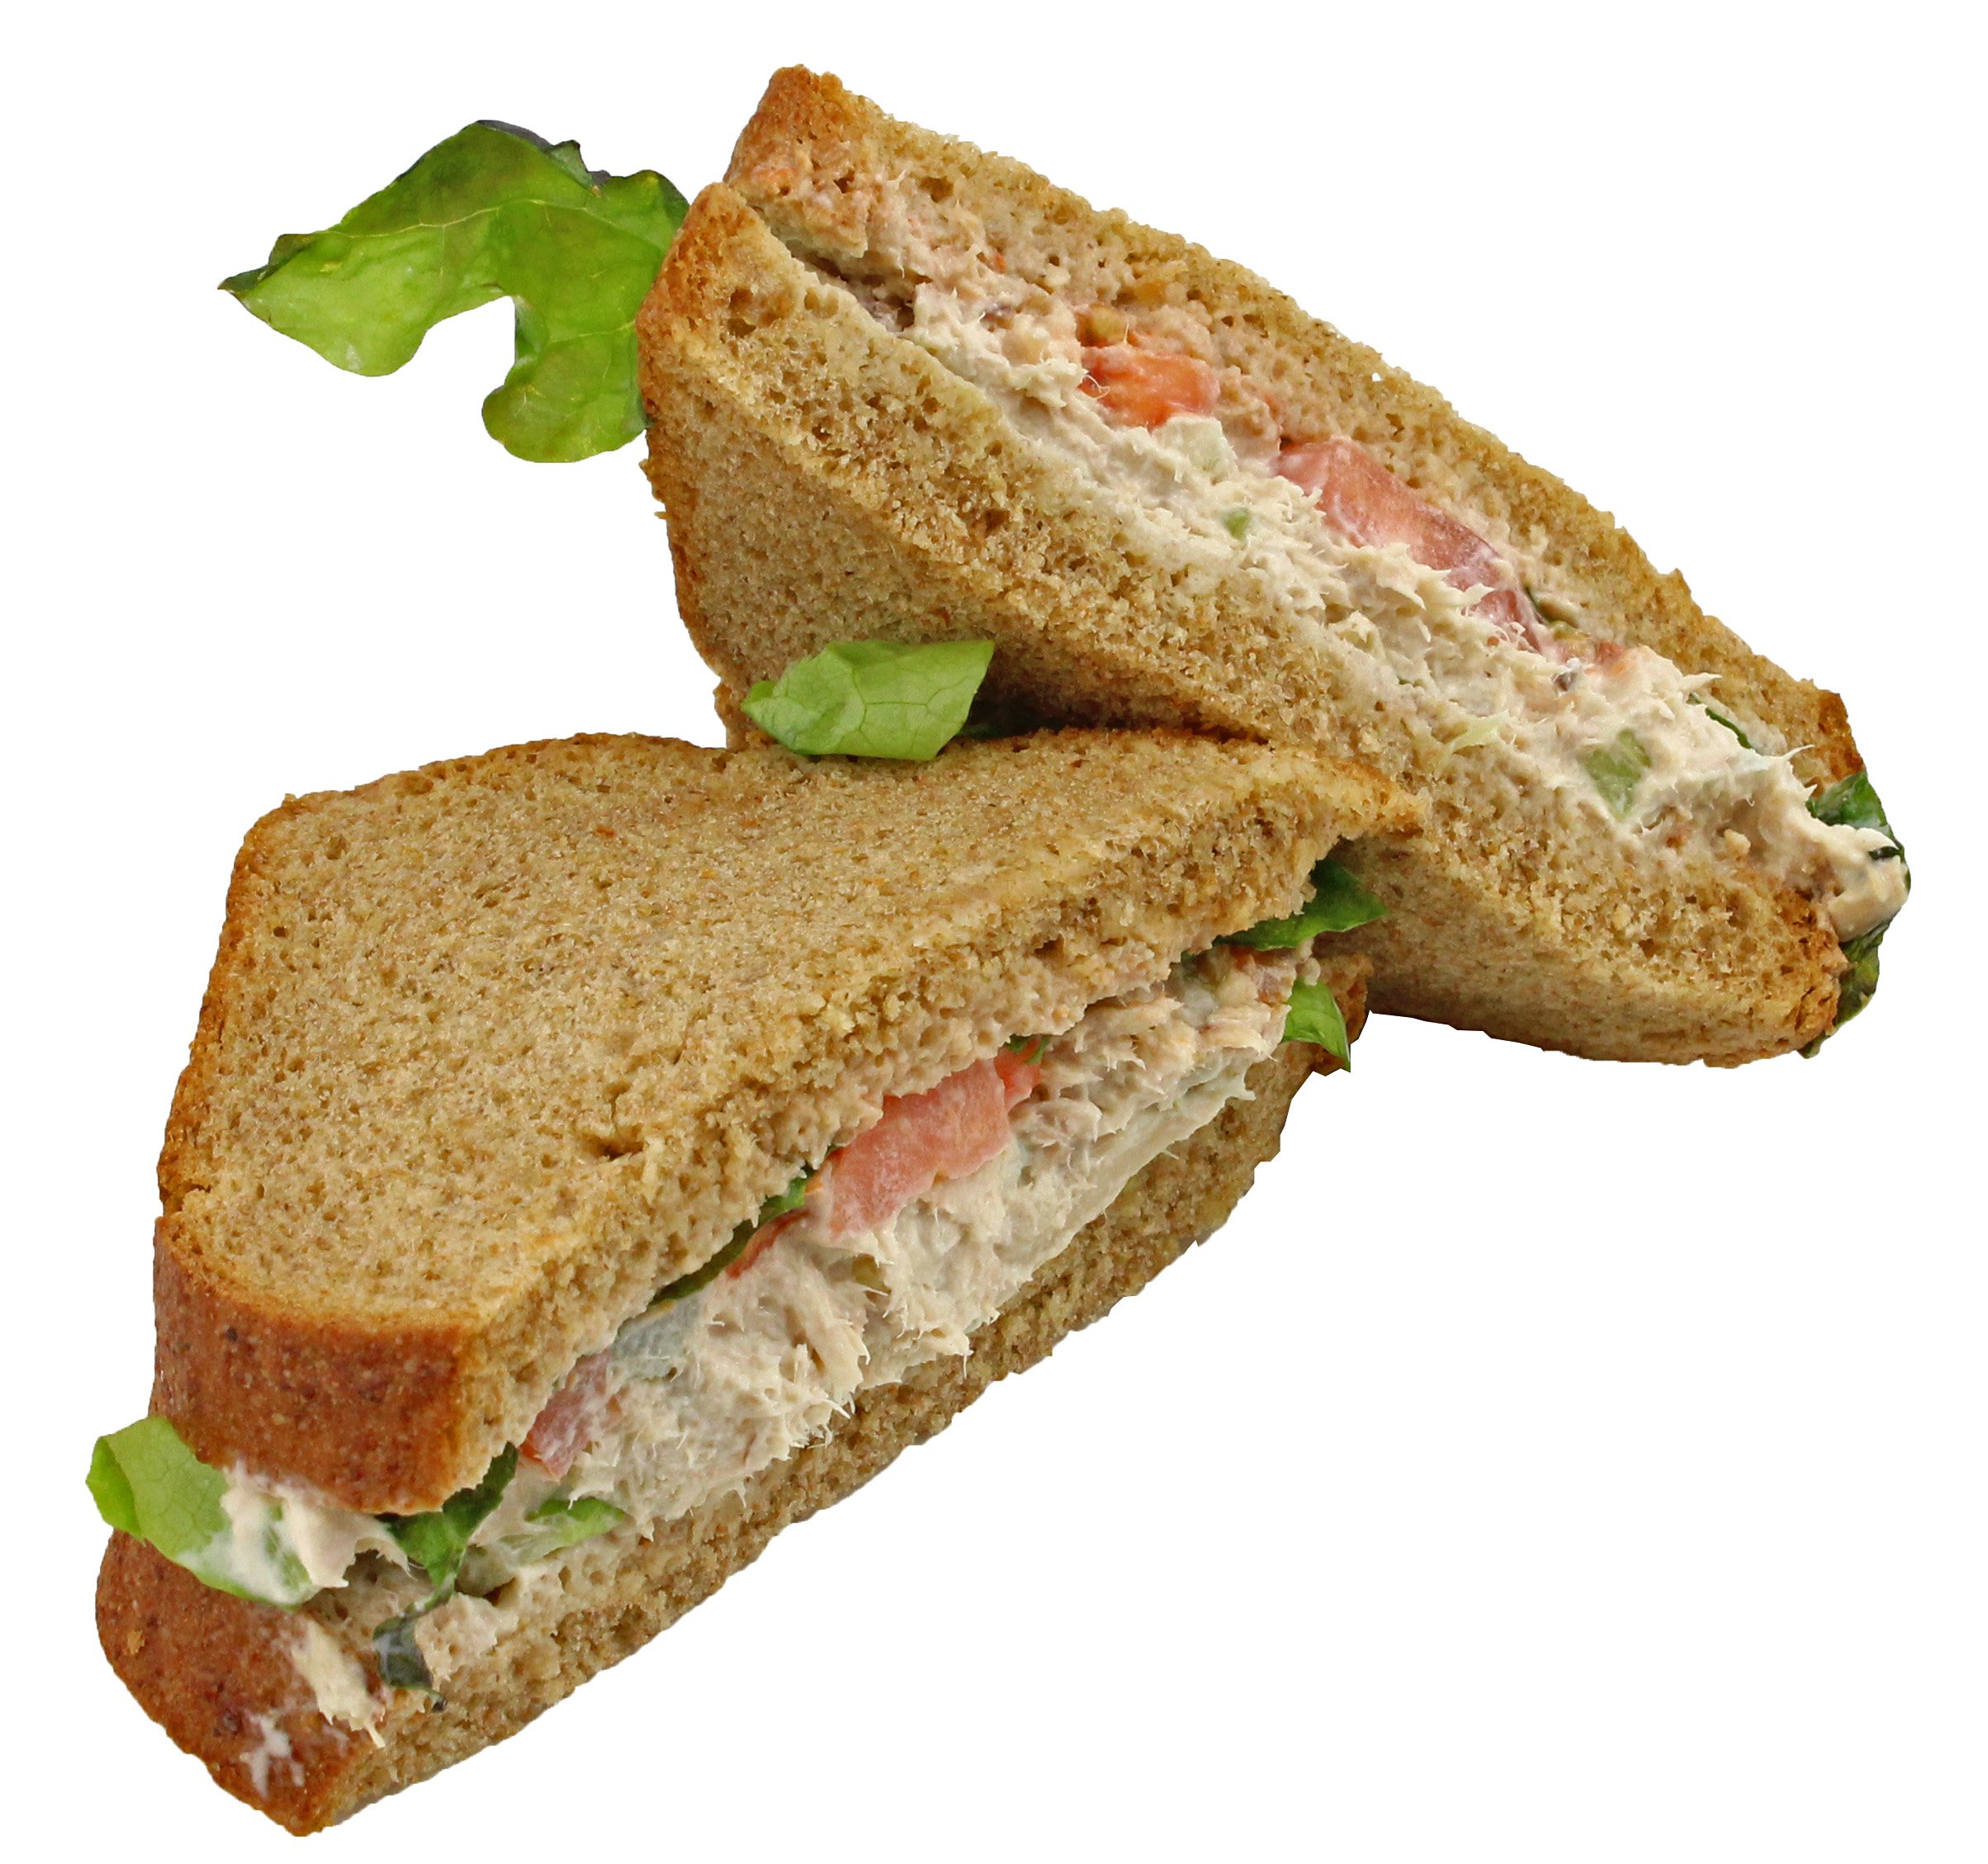 how many calories in a salad sandwich